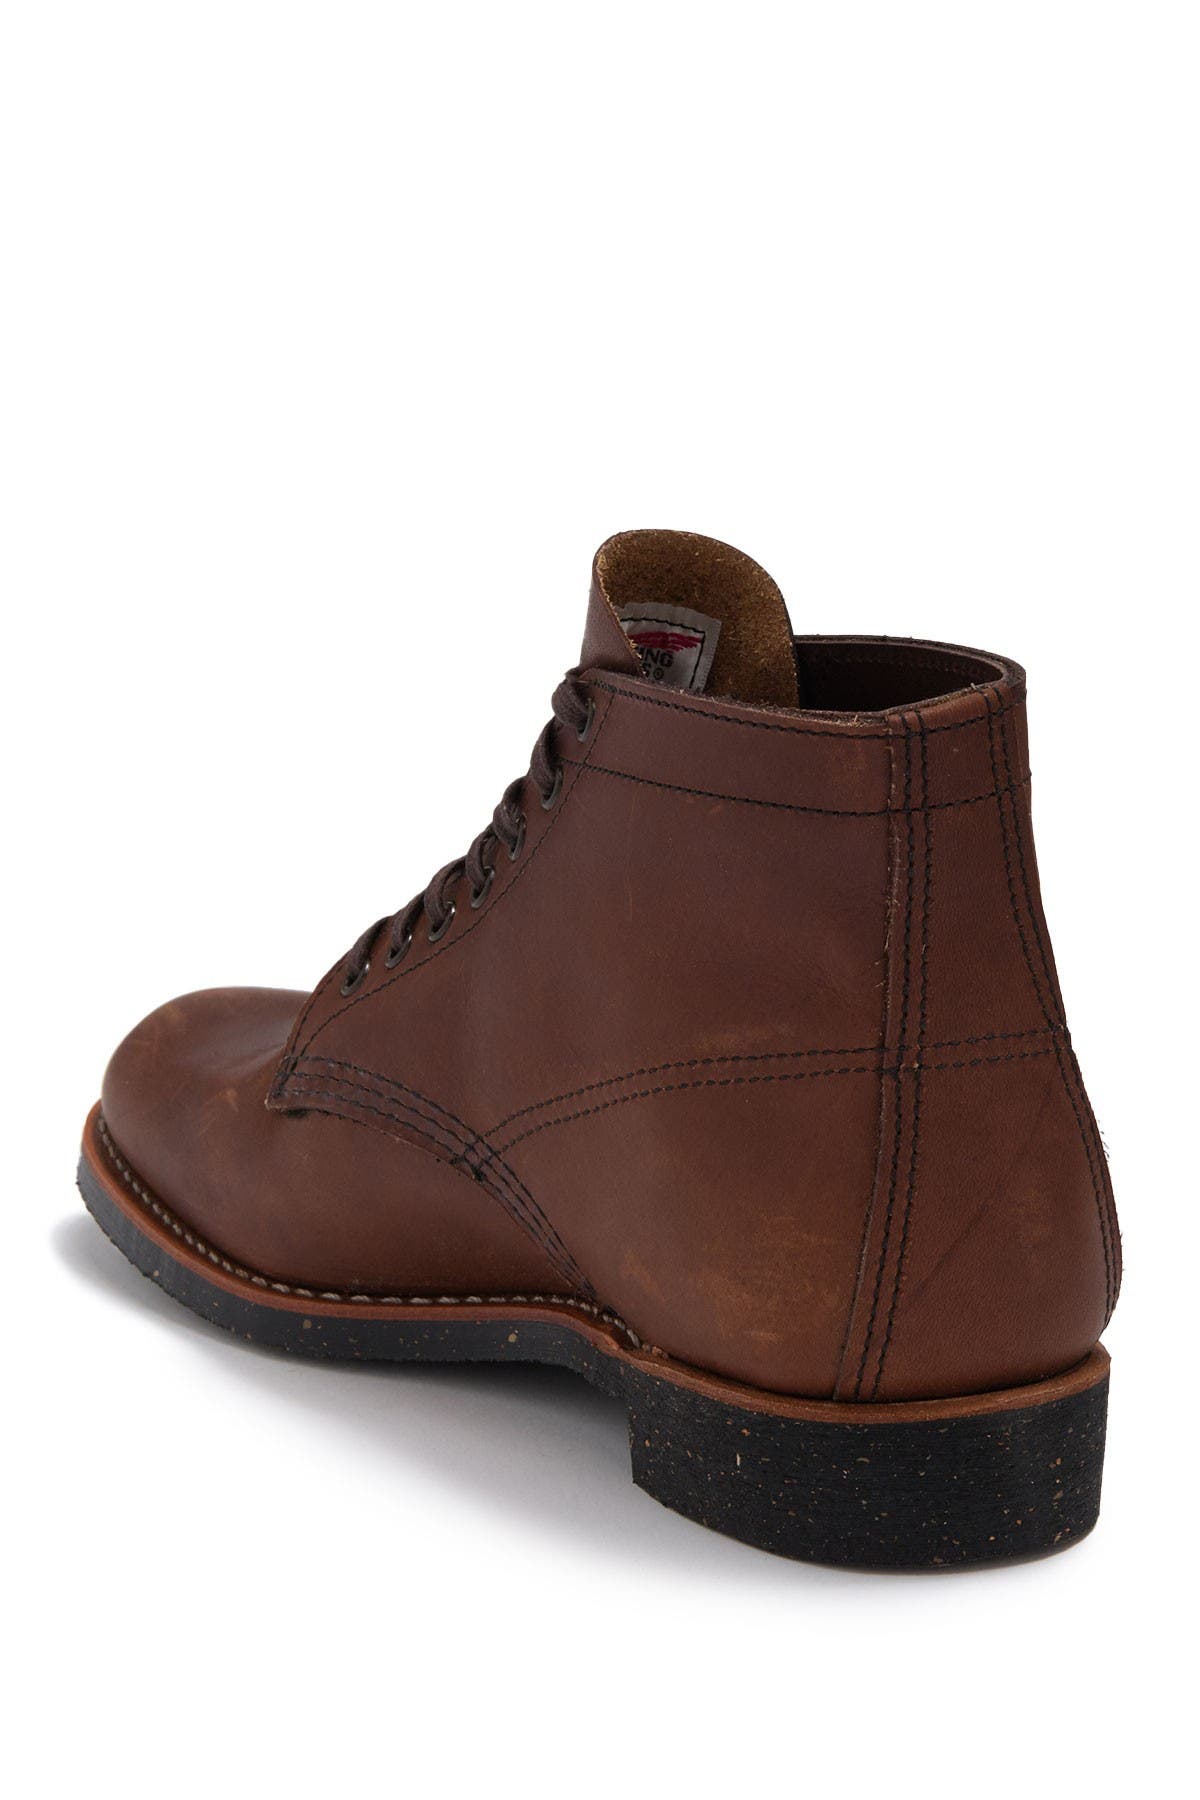 red wing merchant seconds